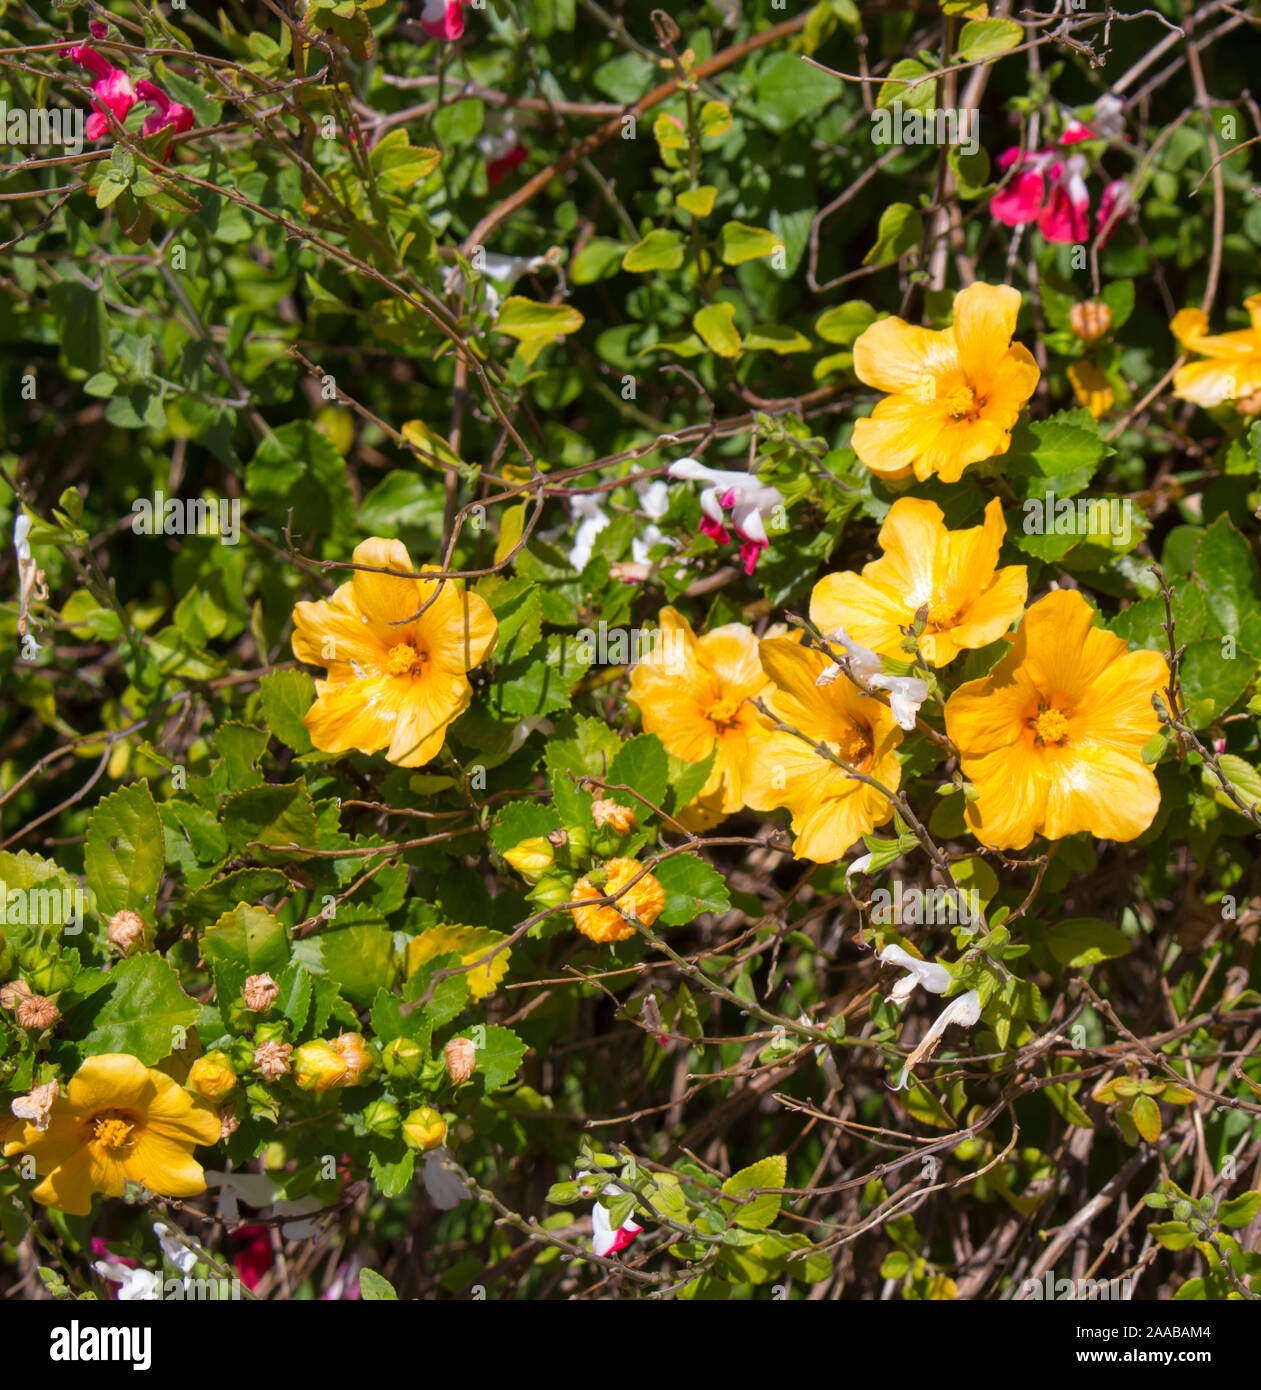 Sida Fallax Butterkin is a low spreading shrub buttery-orange whose flowers resemble a miniature Hibiscus and occur in prolific terminal clusters . Stock Photo